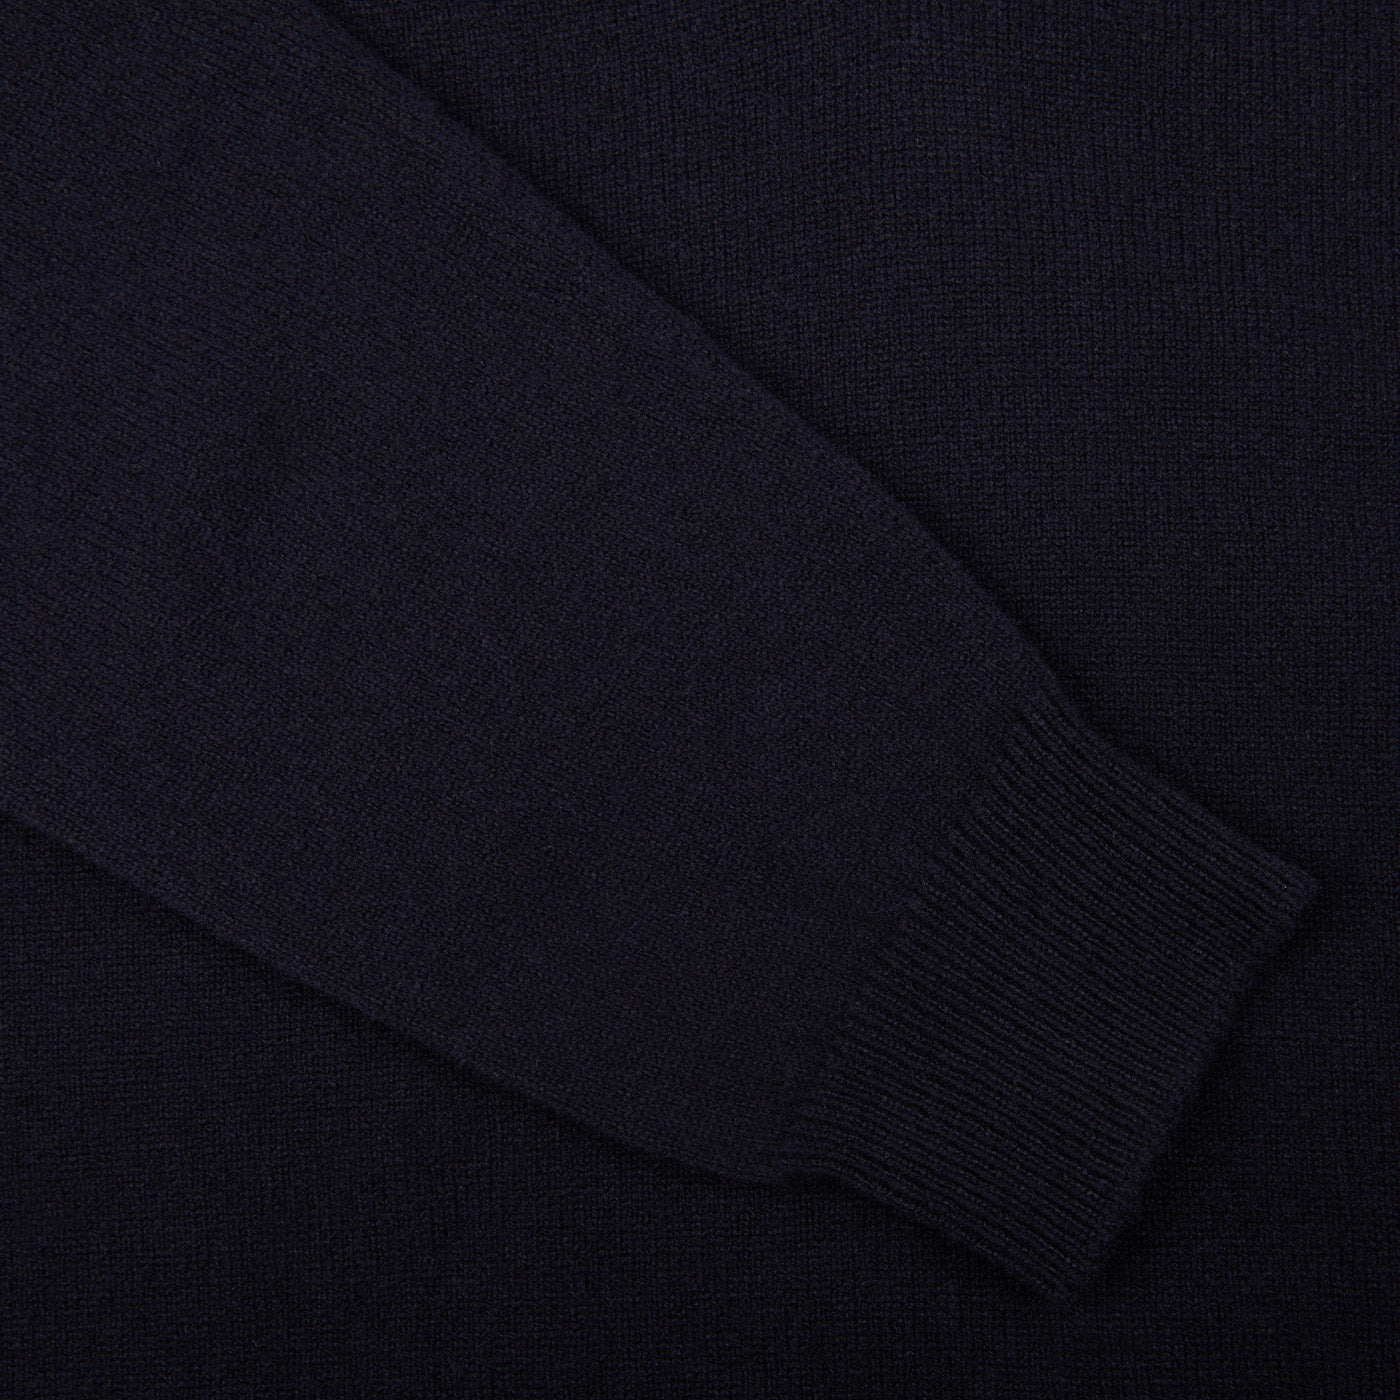 A close up of a William Lockie Dark Navy V-Neck Lambswool Sweater.